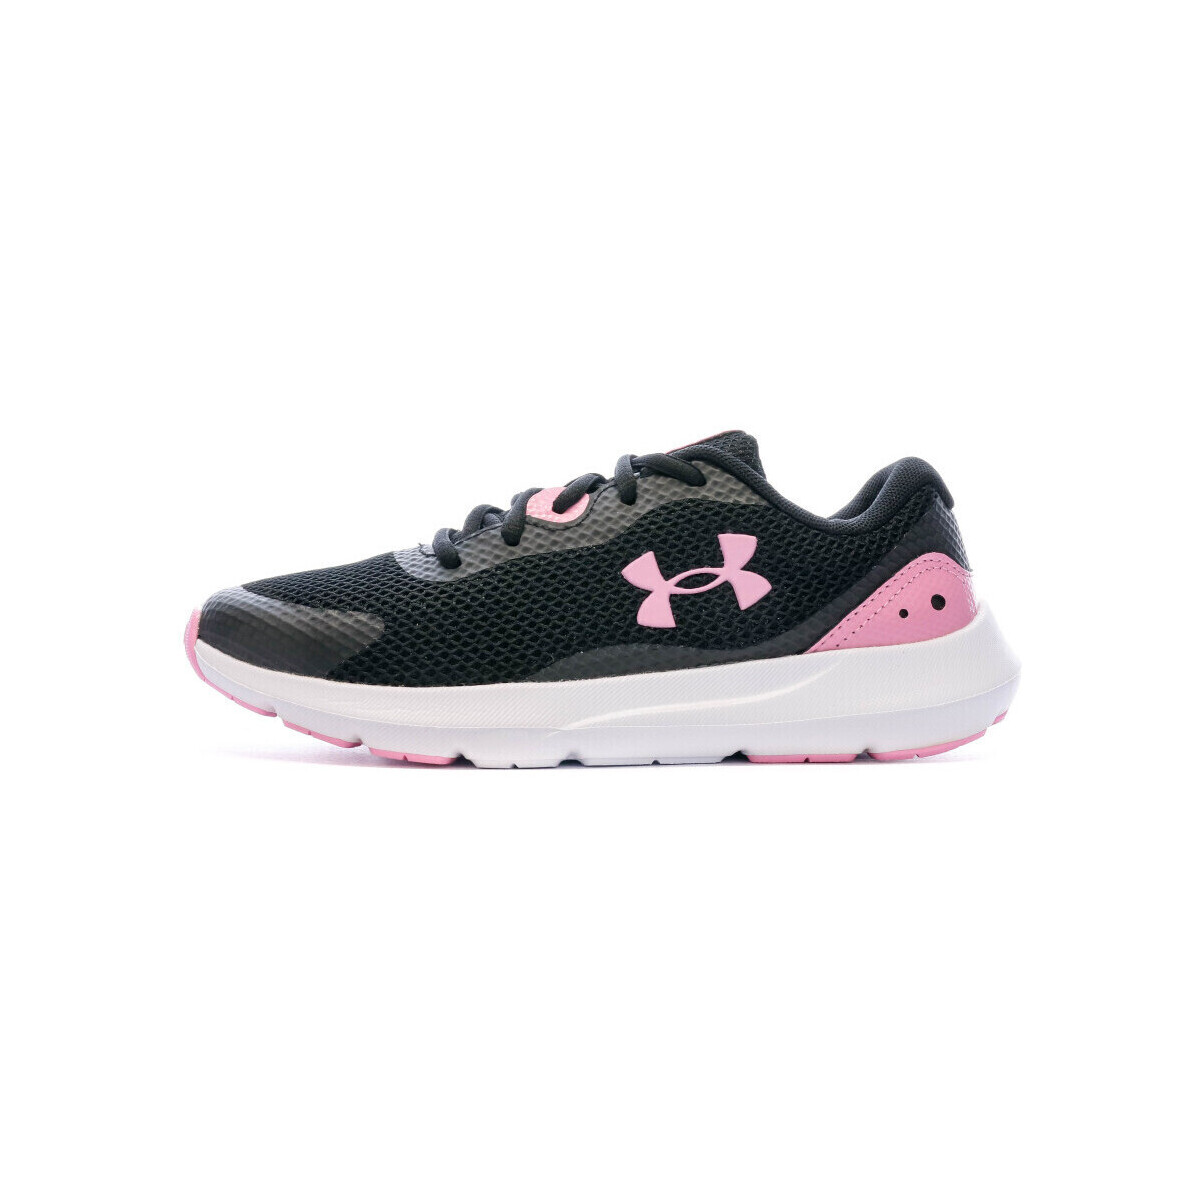 Chaussures Fille Fitness / Training Under Armour 3025013-001 Noir